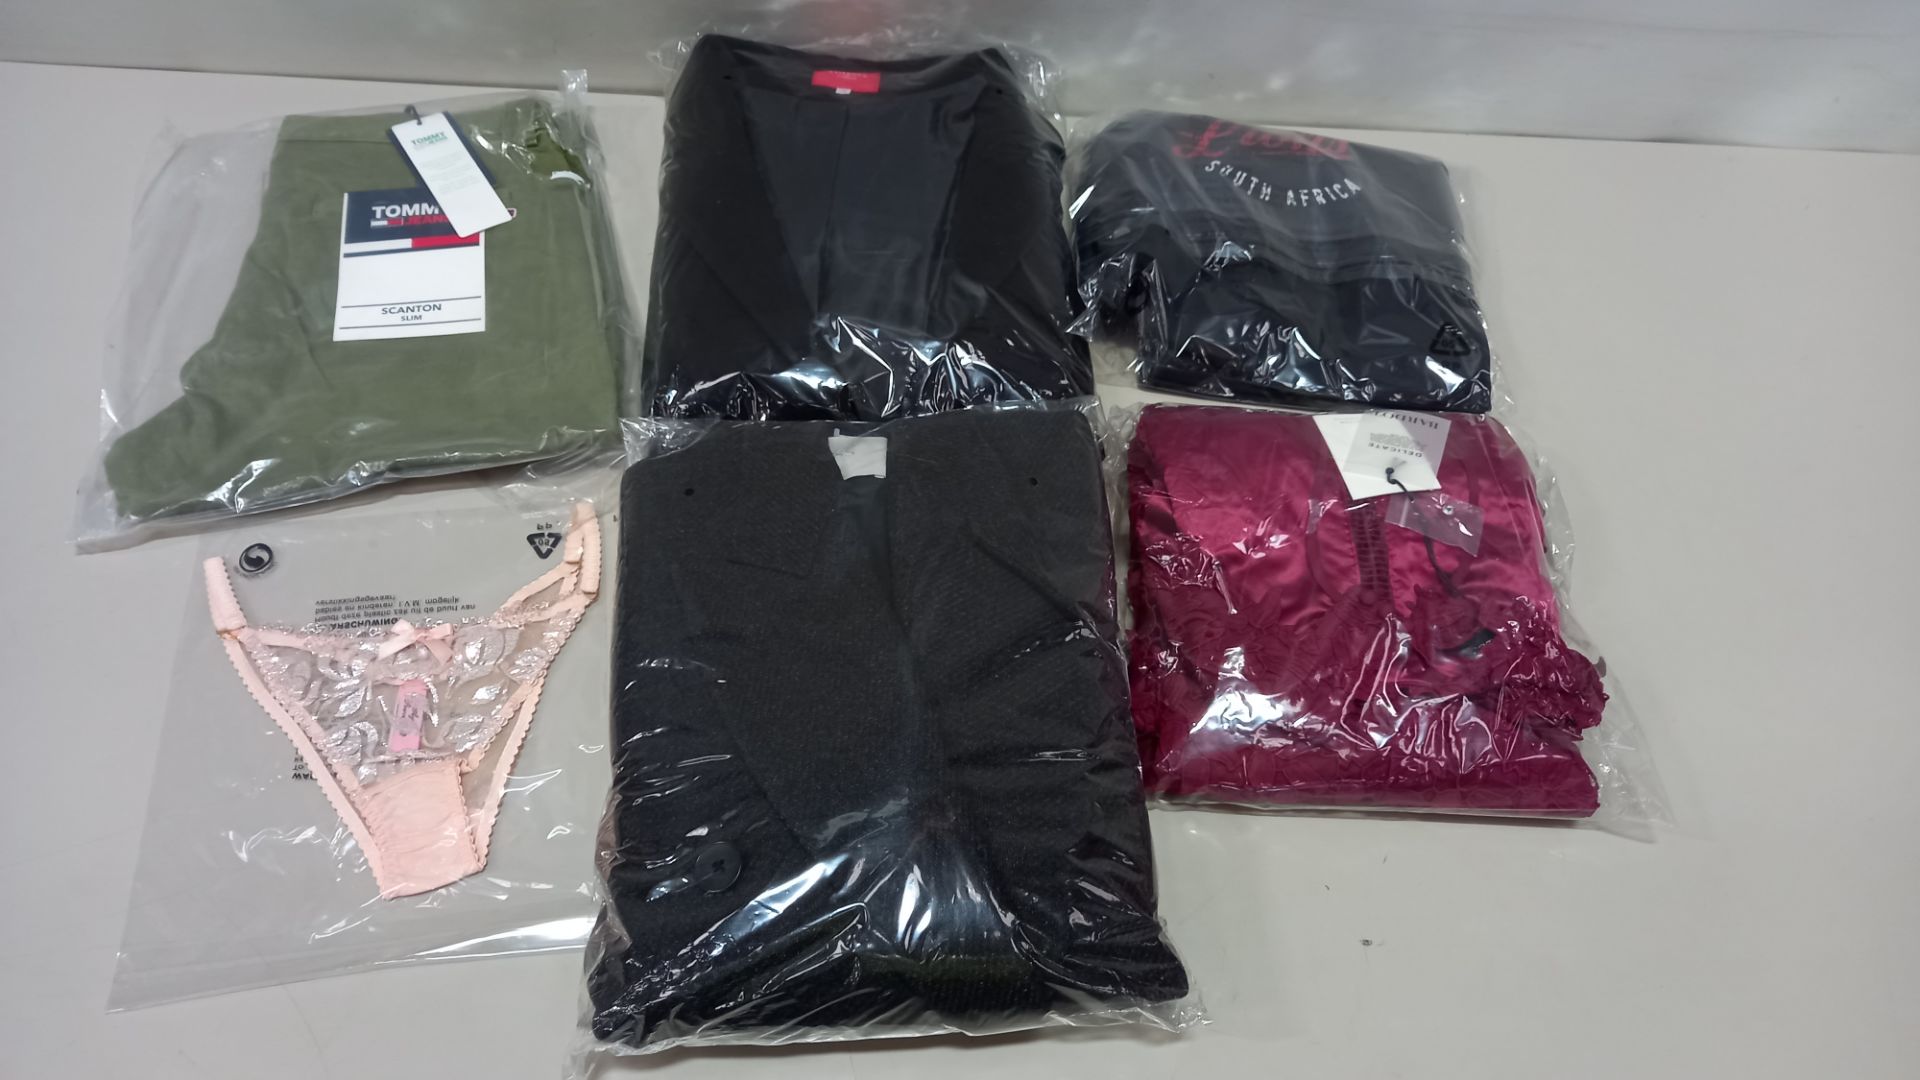 6 PIECE MIXED CLOTHING LOT CONTAINING TOMMY JEANS SKIRT SIZE 32, AGENT PROVOCATEUR PANTS SIZE 3,